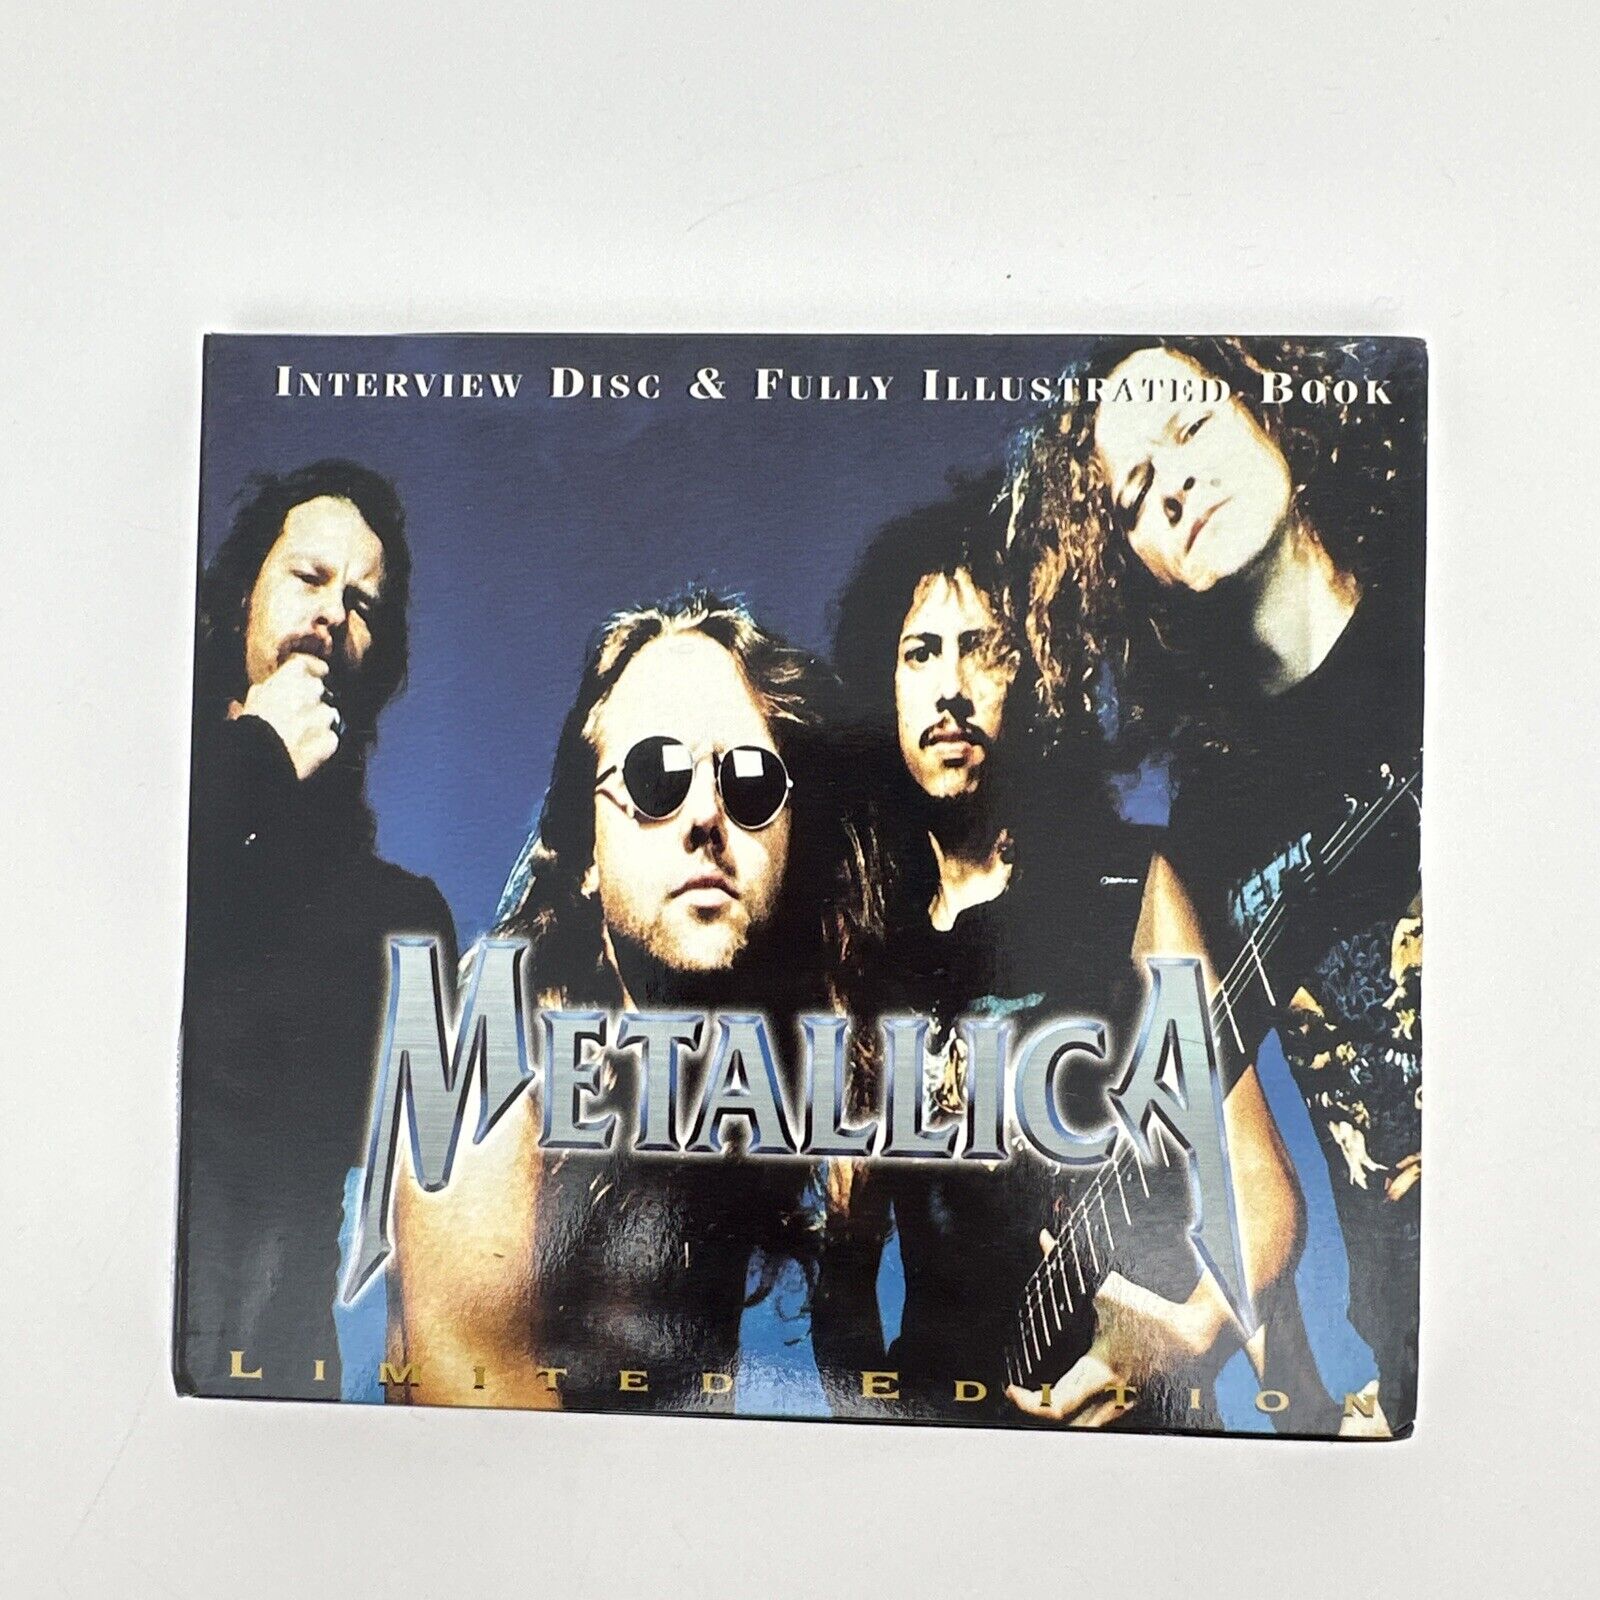 Metallica ‎limited Edition Illustrated Book and Interview Disc 1 Pcs - 1996…109